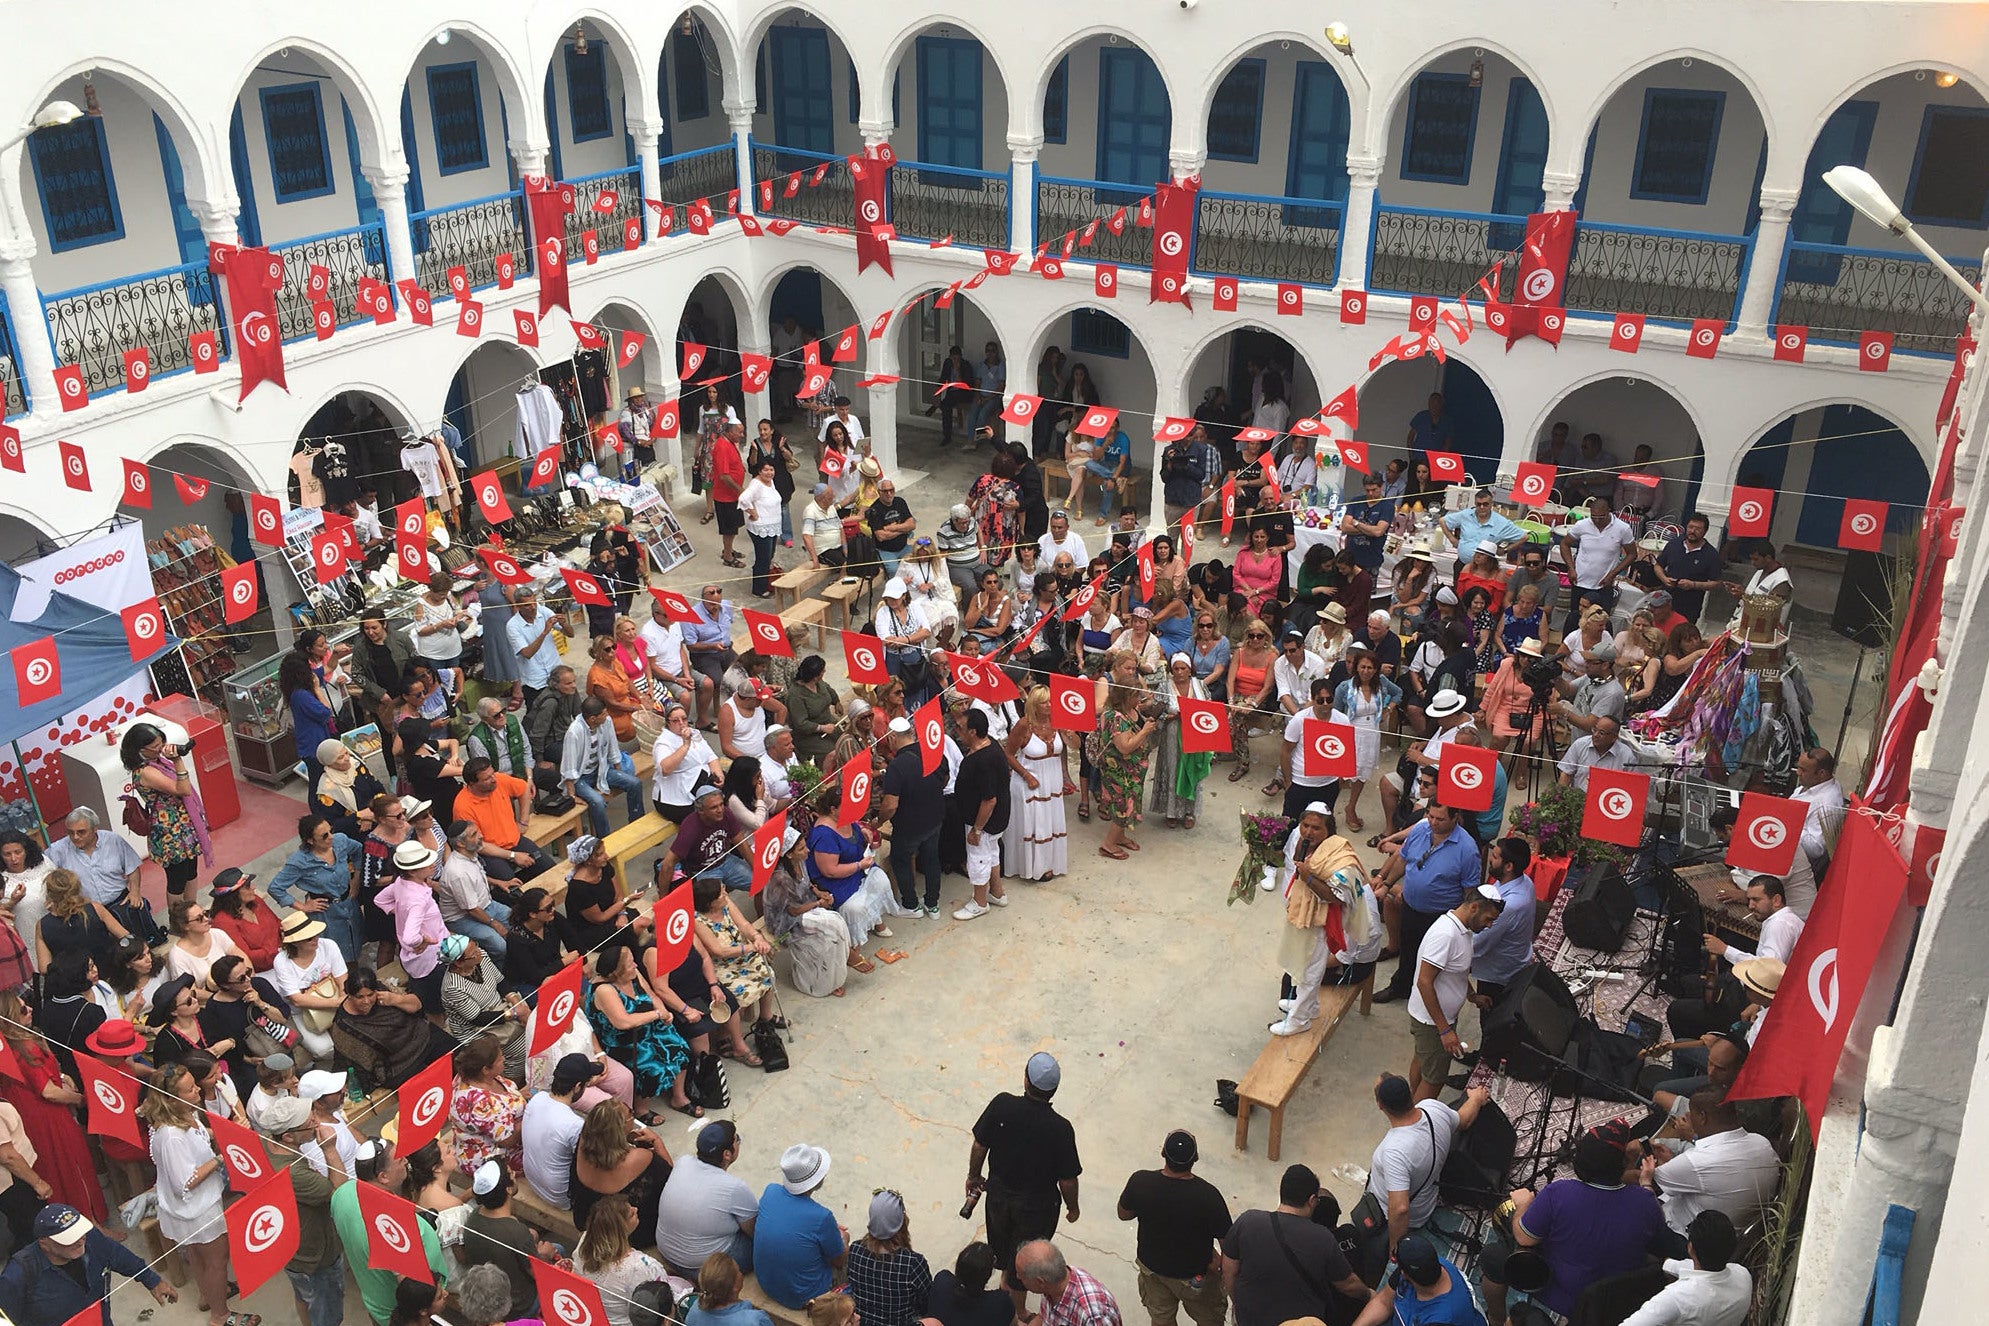 Ghriba Synagogue is decorated with red Tunisian flags